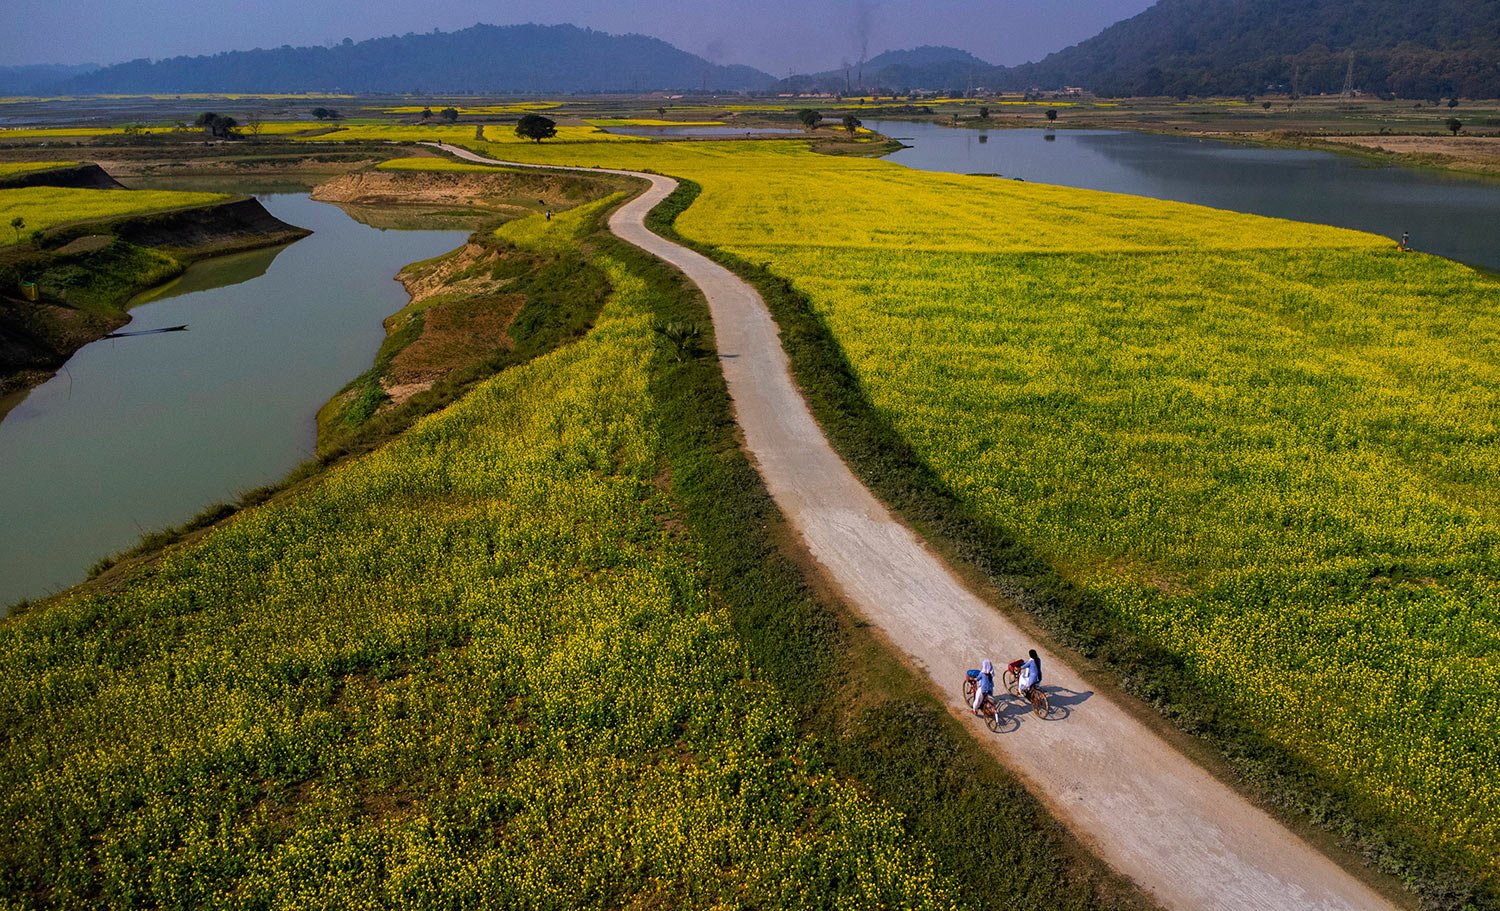  College students ride on their bicycles through the mustard fields on the outskirts of Guwahati, India, Thursday, Dec. 22, 2022. (AP Photo/Anupam Nath) 